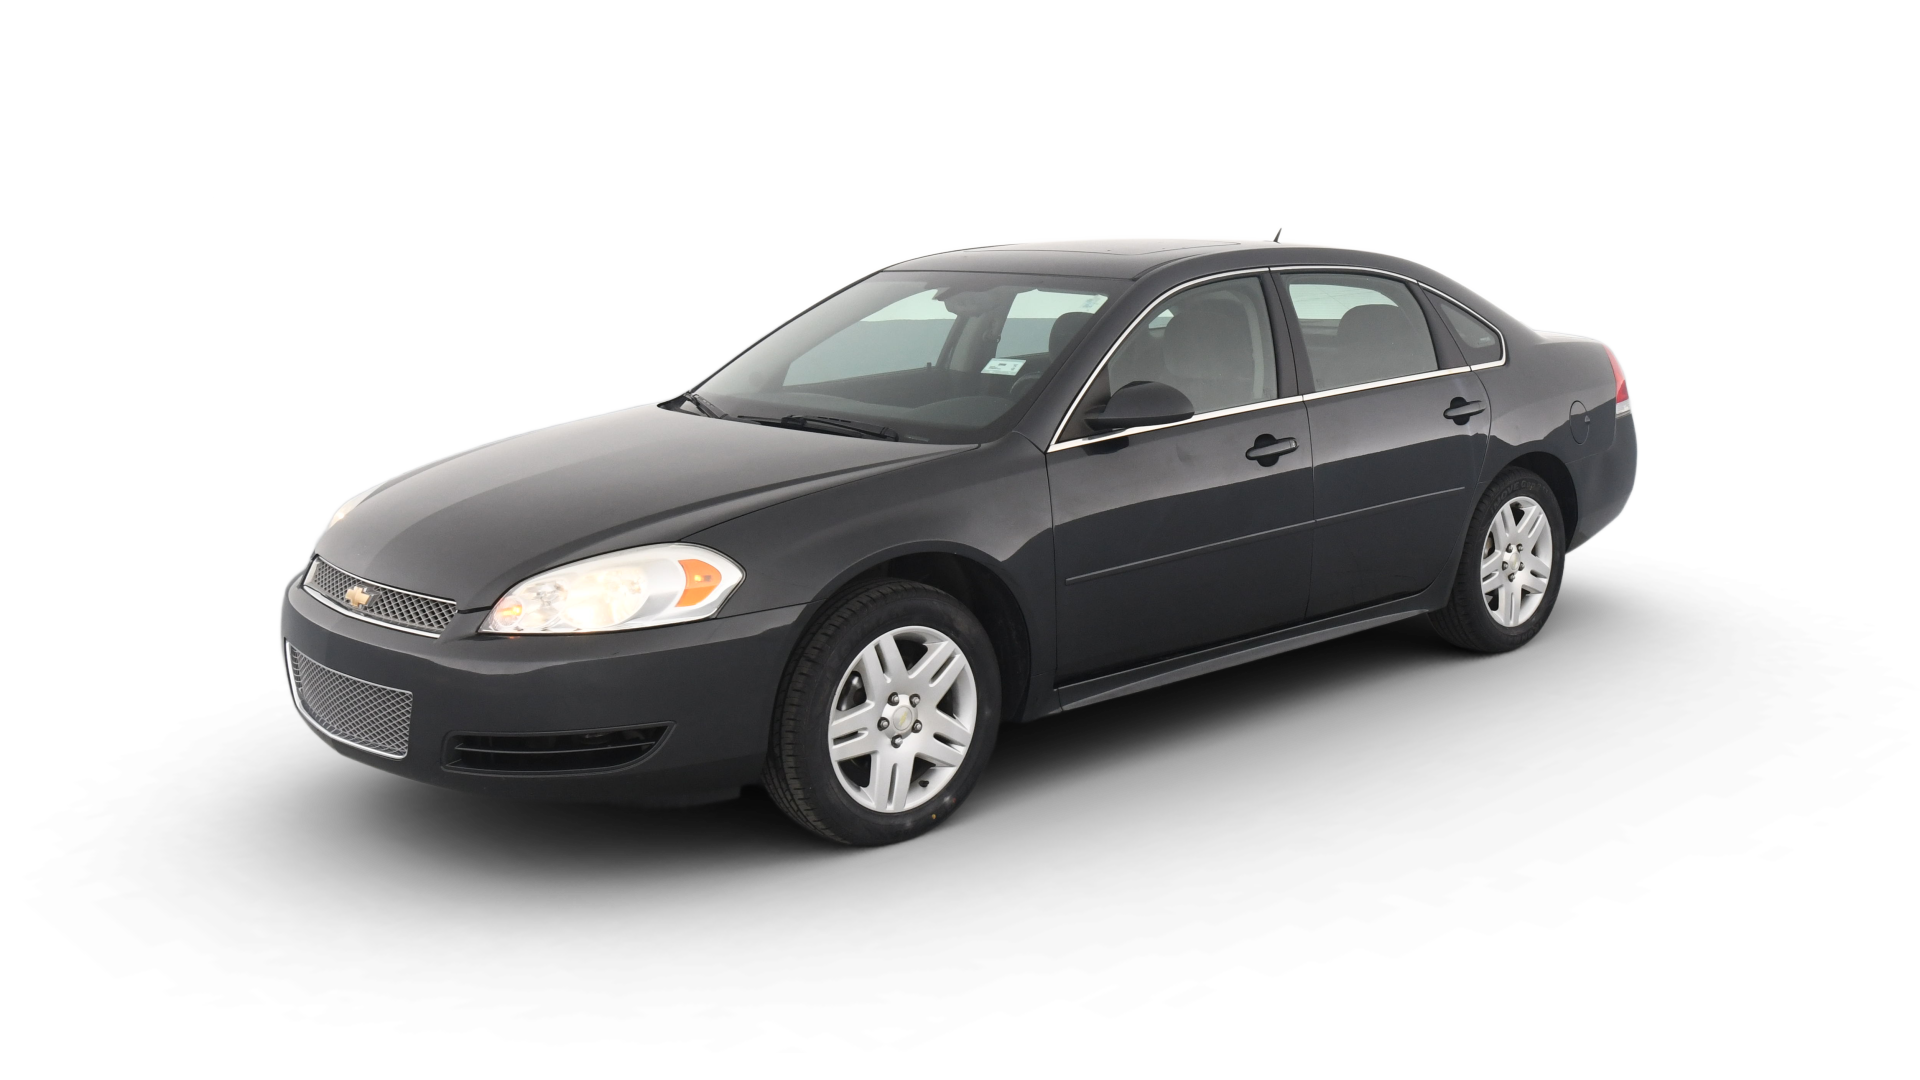 Used Chevrolet Impala Limited For Sale Online | Carvana